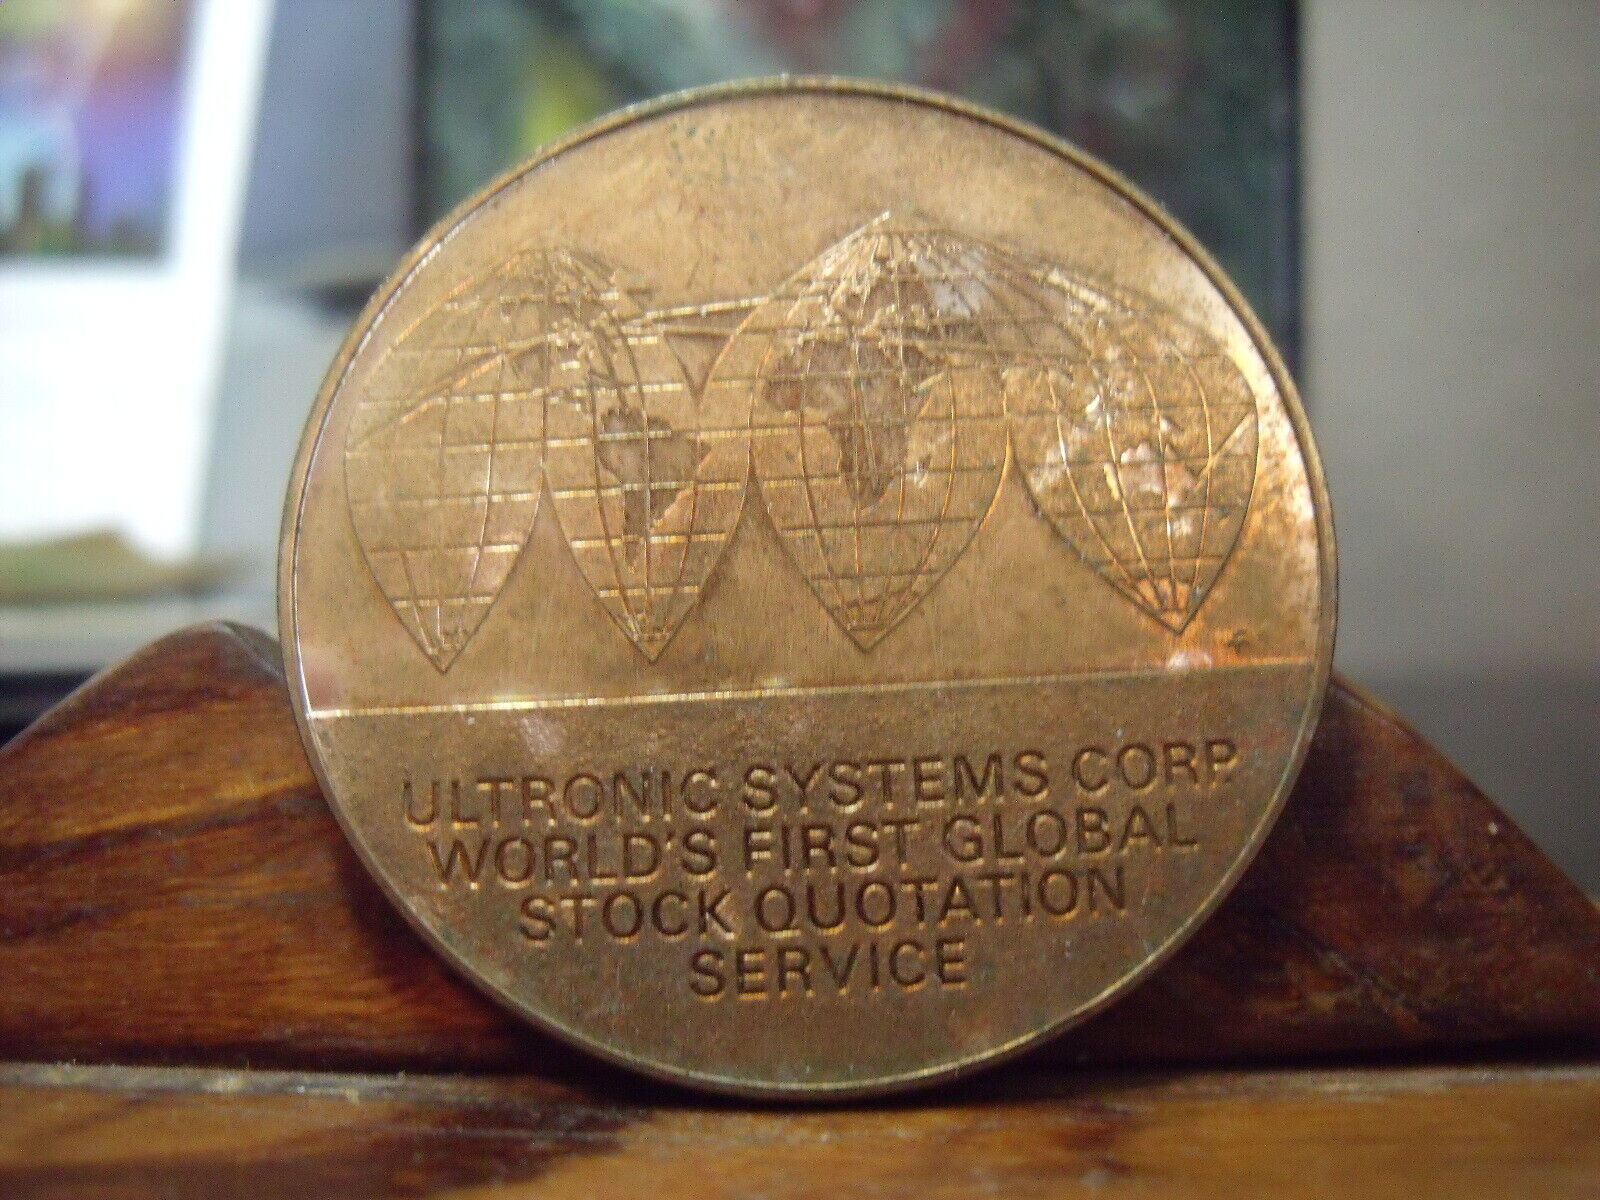 1970 ULTRONIC STSTEMS CORP -WORLD'S FIRST GLOBAL STOCK QUOTATION